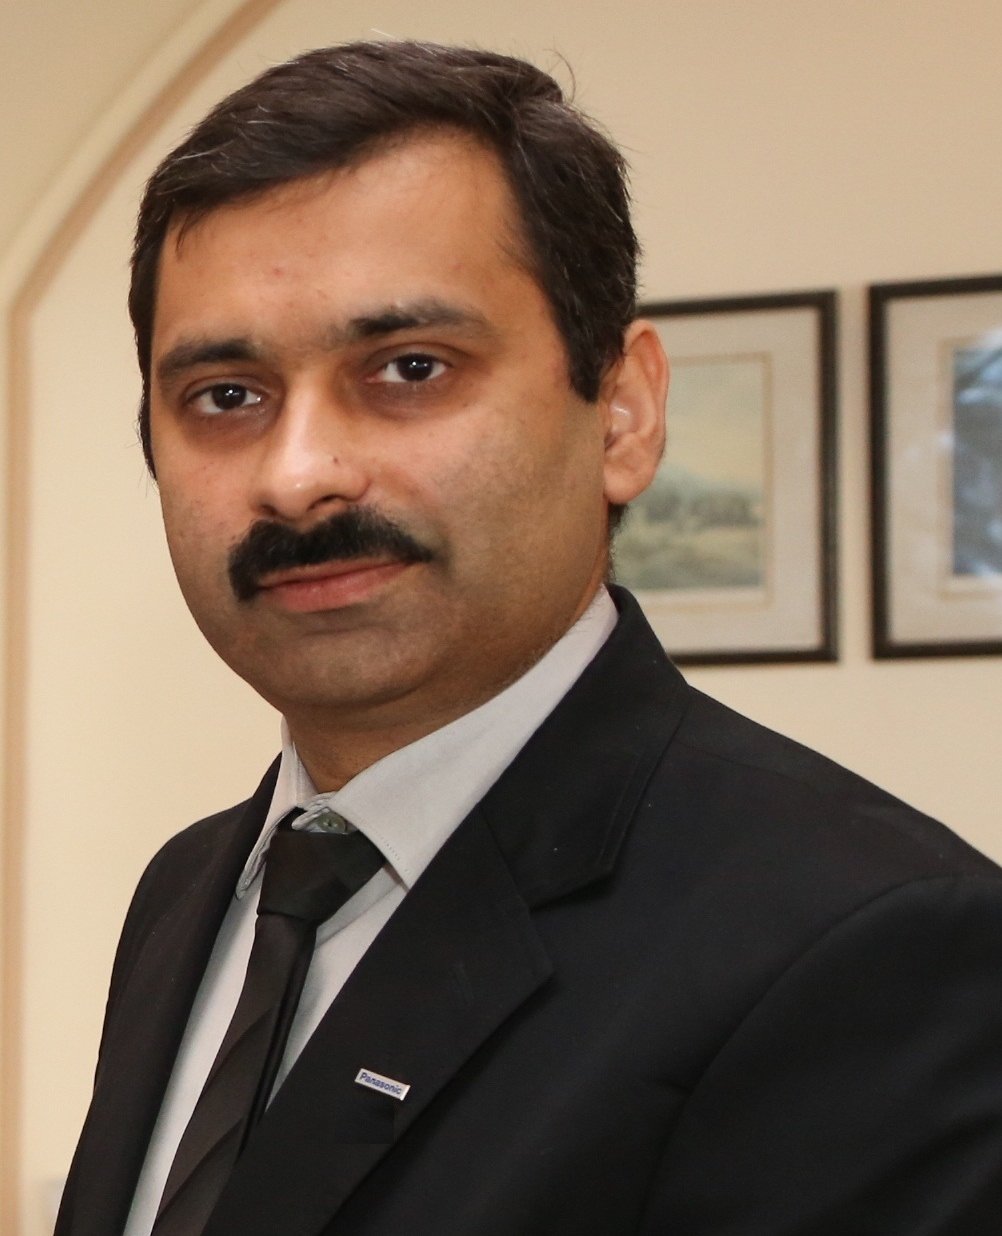 Mr Gunjan Sachdev is the general manager (National Business Head), Toughbook, Panasonic India - an industry leader in rugged, reliable handheld and tablet computers. In his role, Gunjan is responsible for the overall leadership, growth and strategy of the